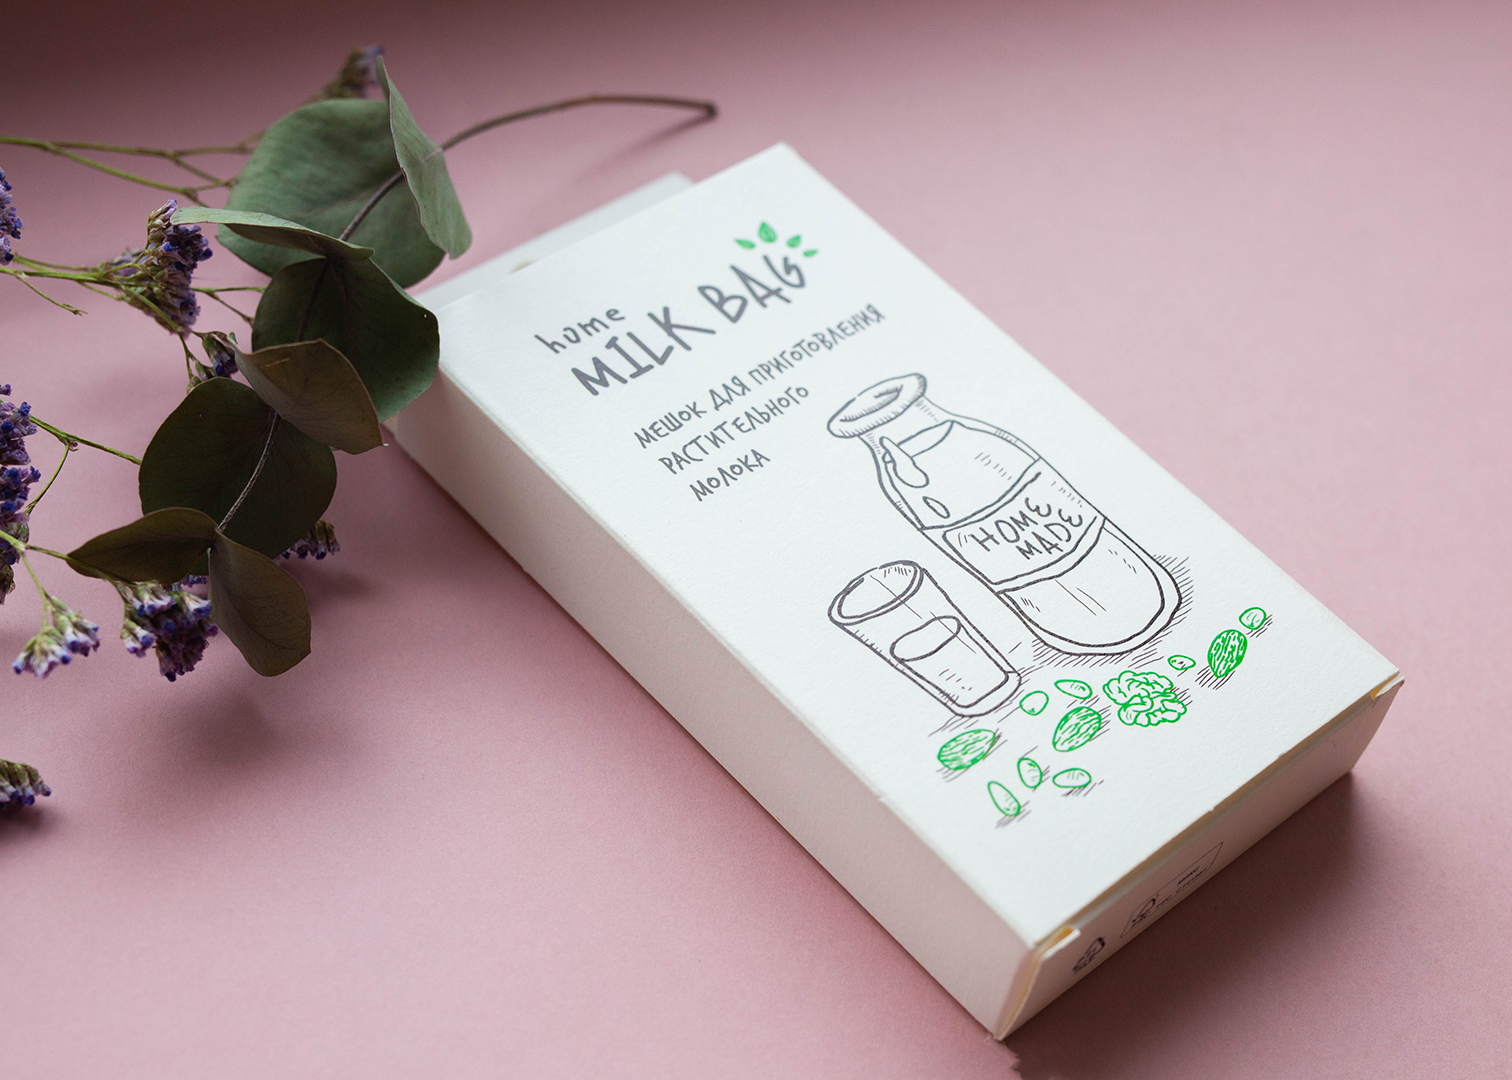 The Home Milk Bag's Packaging Highlights the Brands Green Values